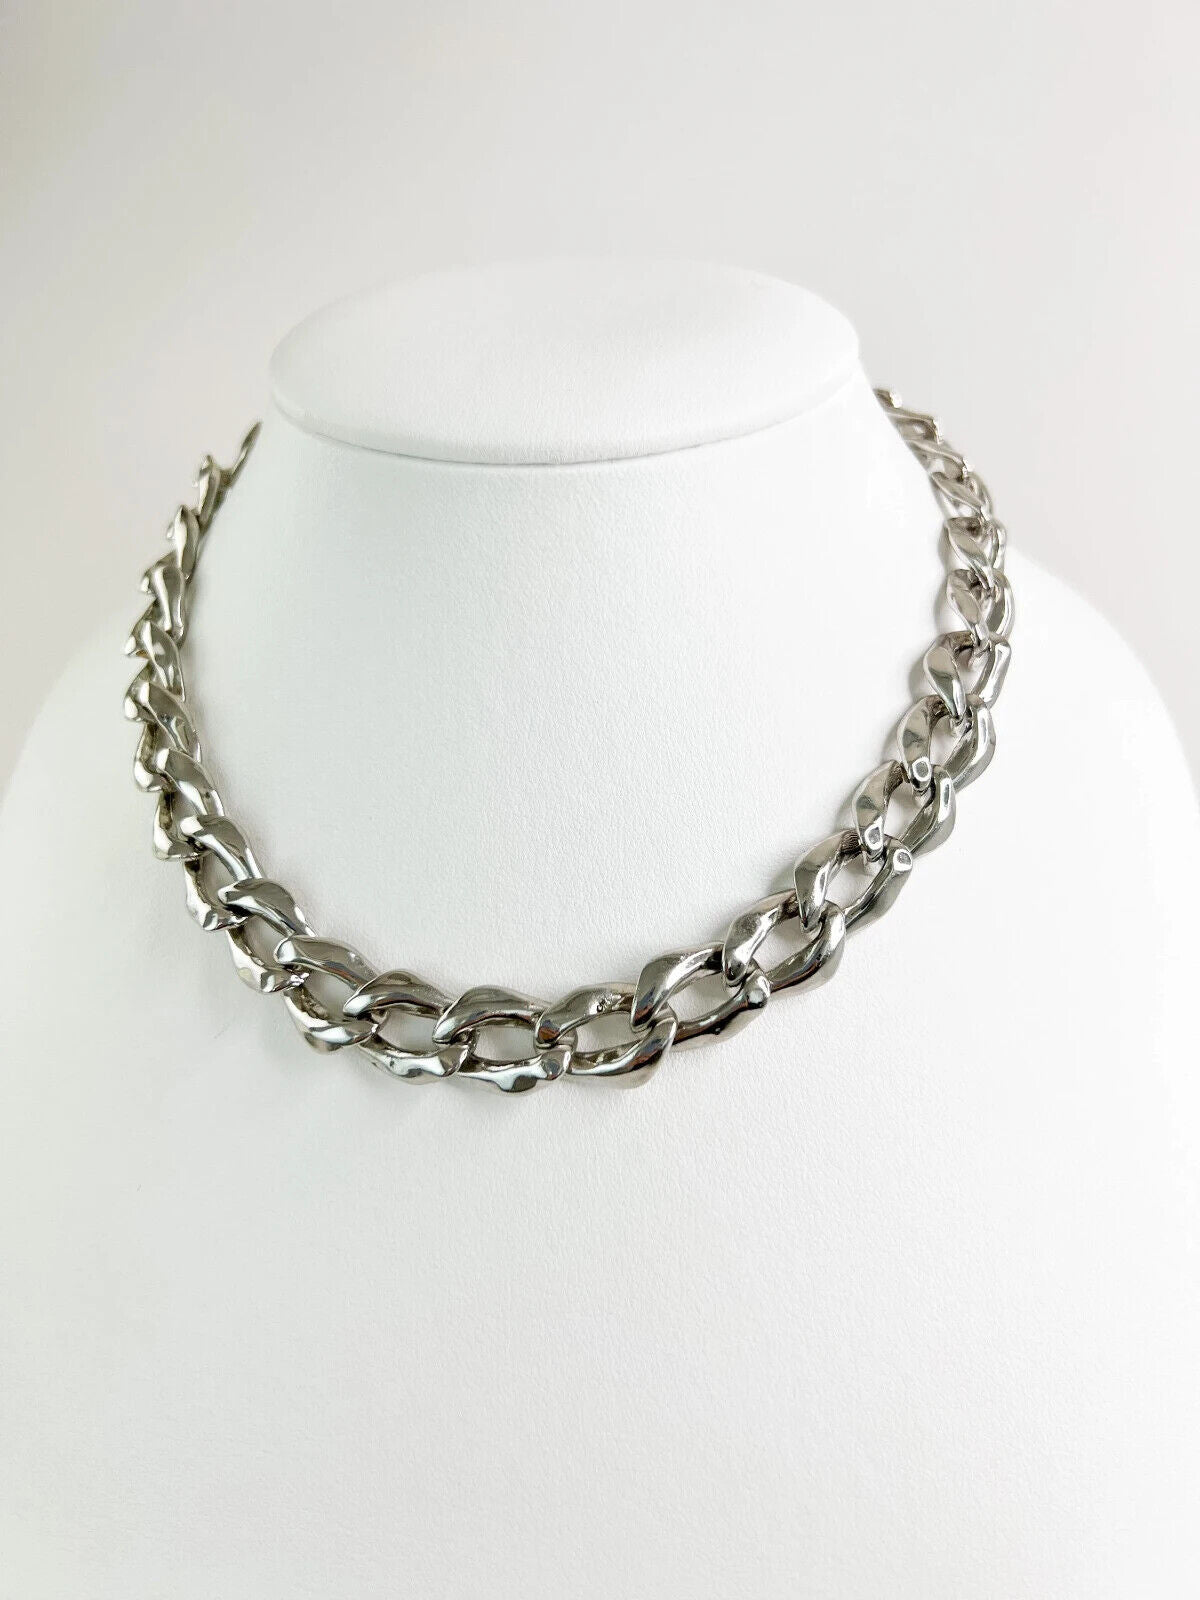 Vintage YSL Yves Saint Laurent Necklace, YSL Chain Necklace Silver, Choker Necklace, Chunky chain silver, Necklace unisex, Gift for him